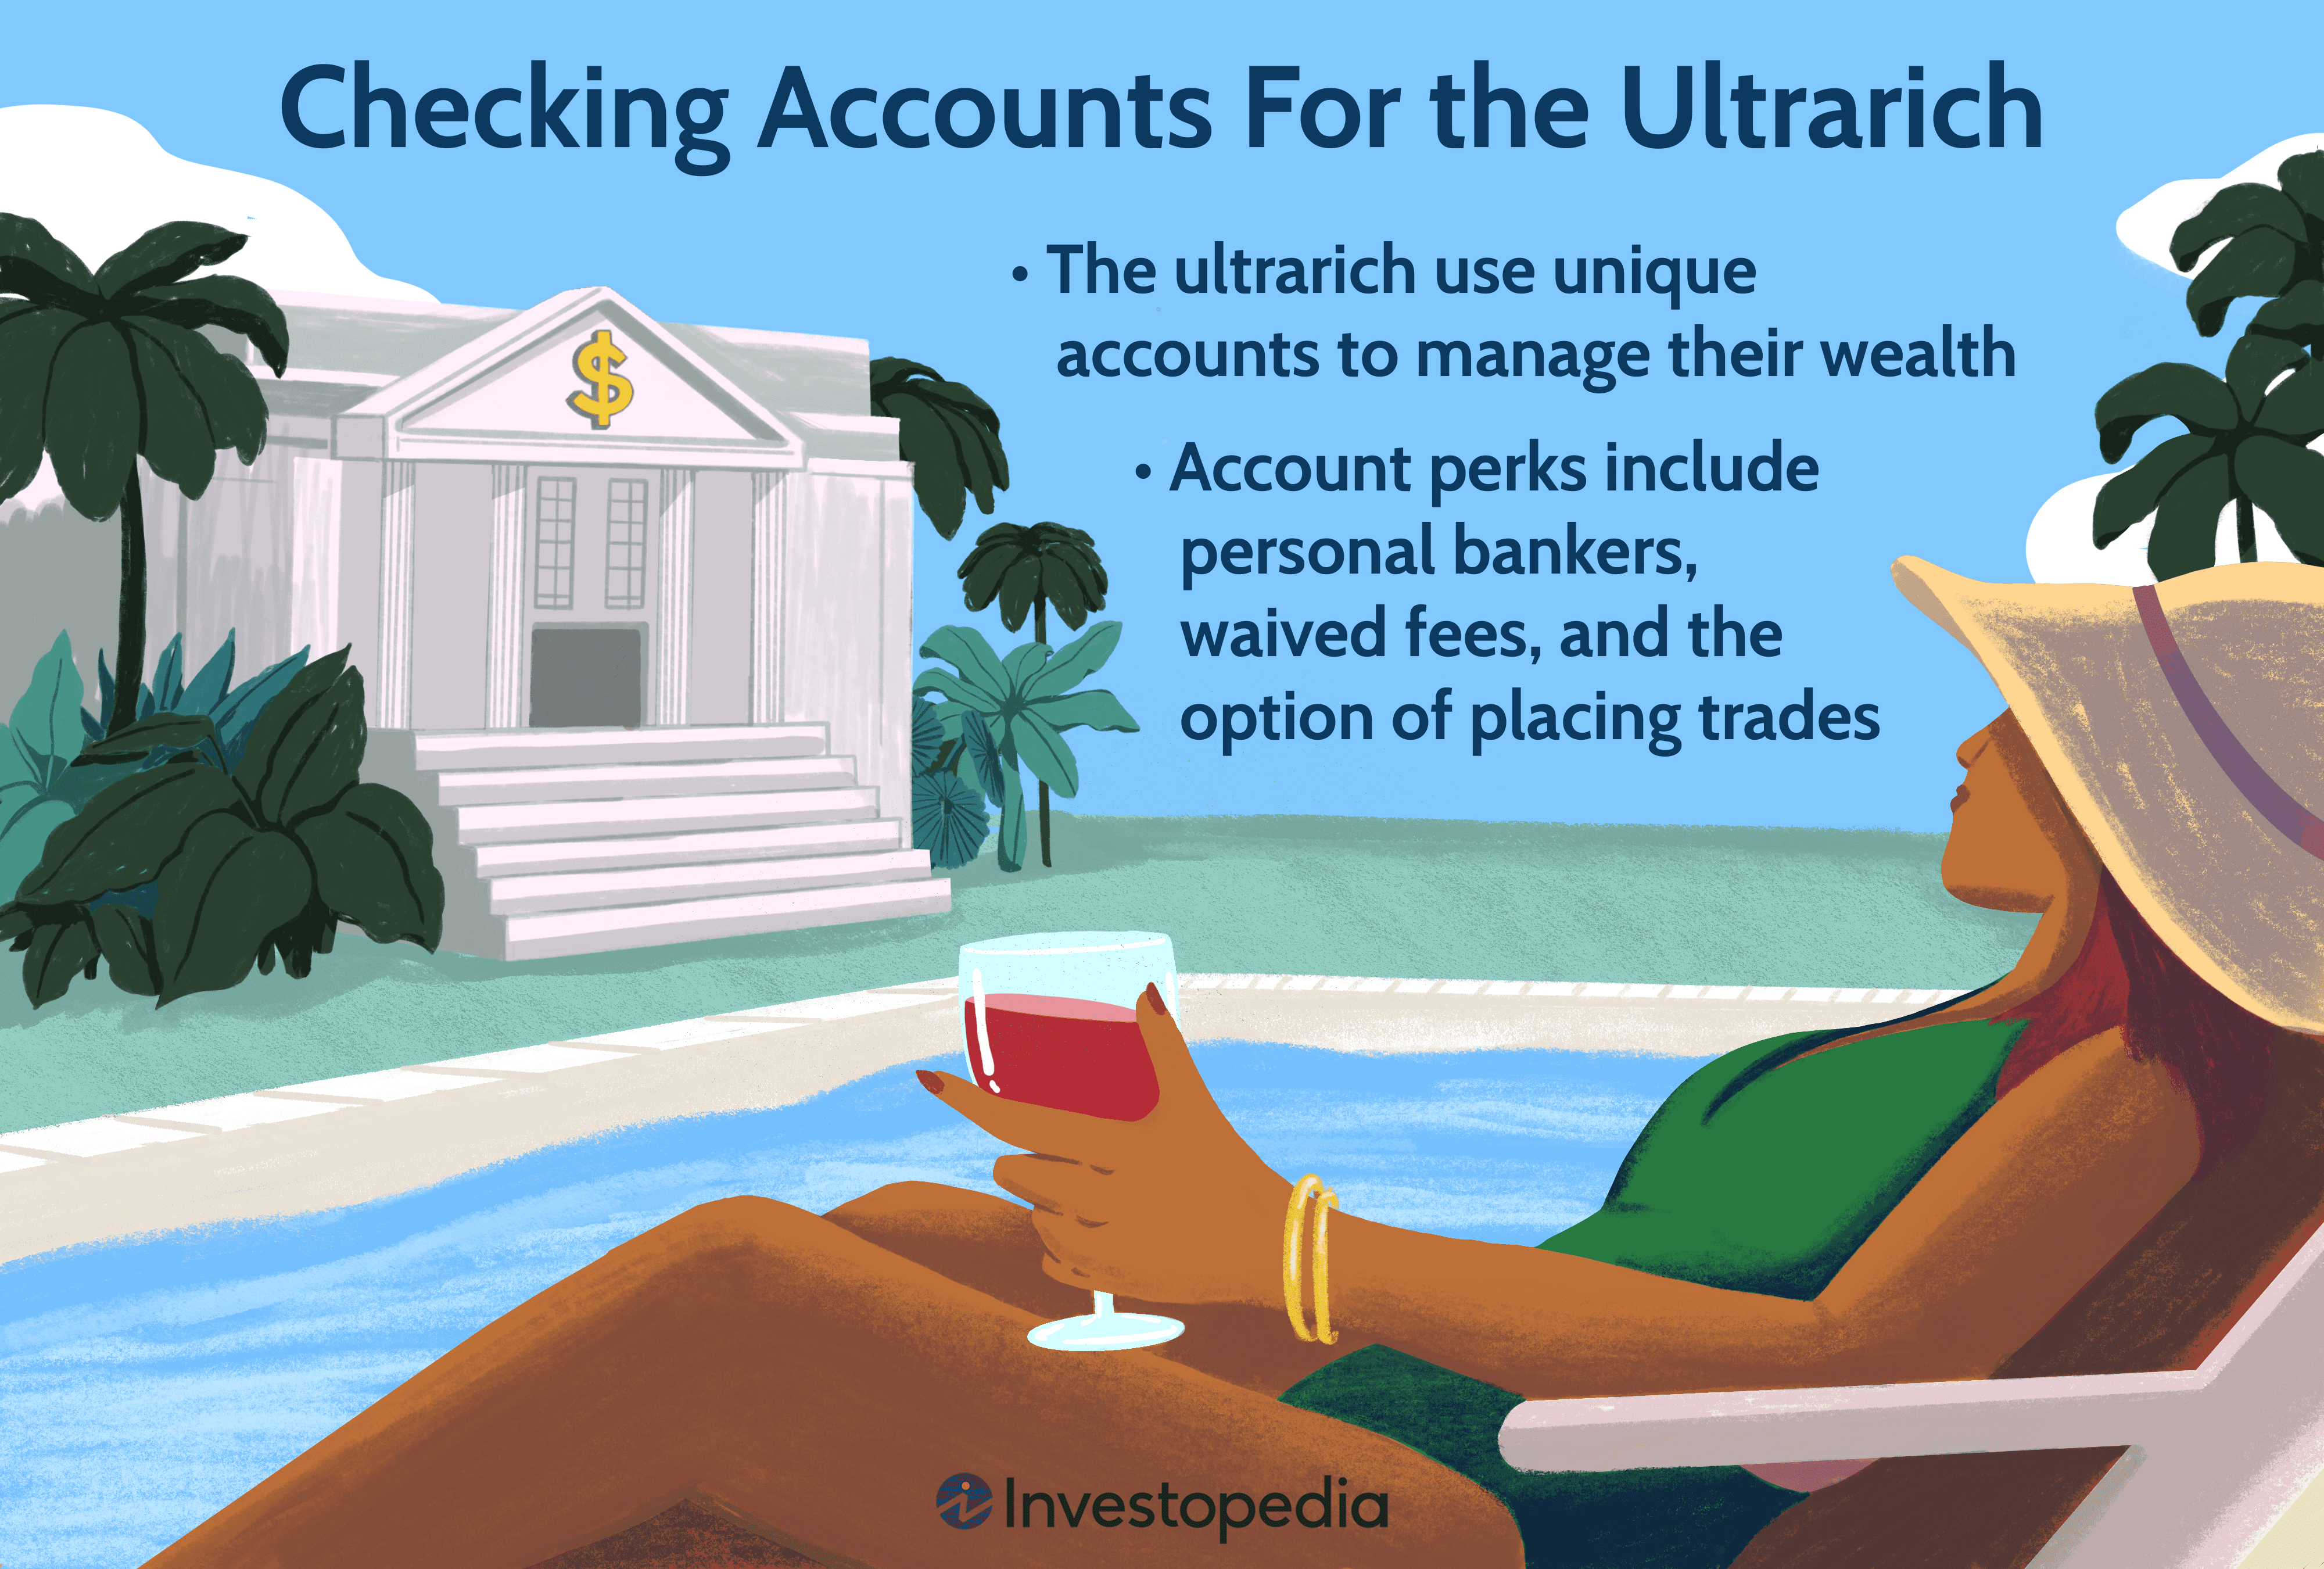 Checking Accounts For the Ultrarich